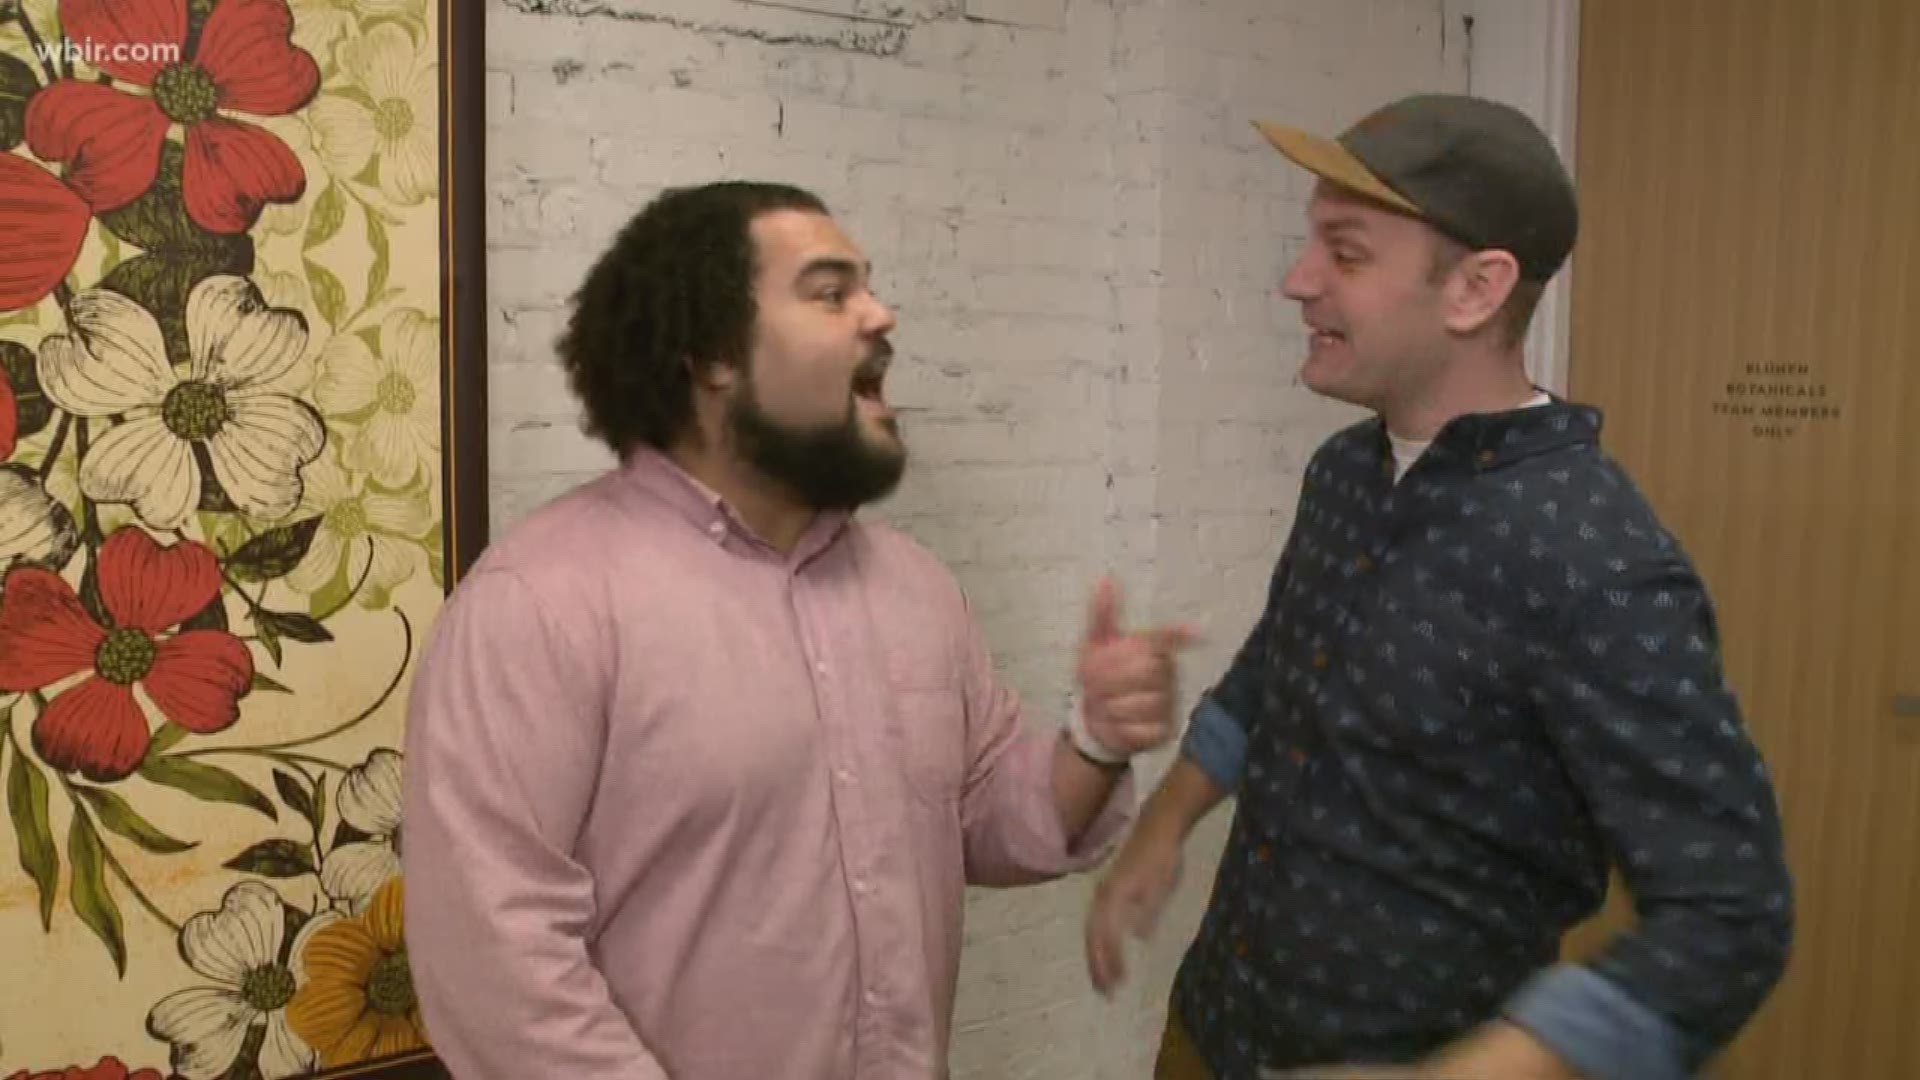 Two guys from East Tennessee havebeen invited to perform slam poetry in Denver.